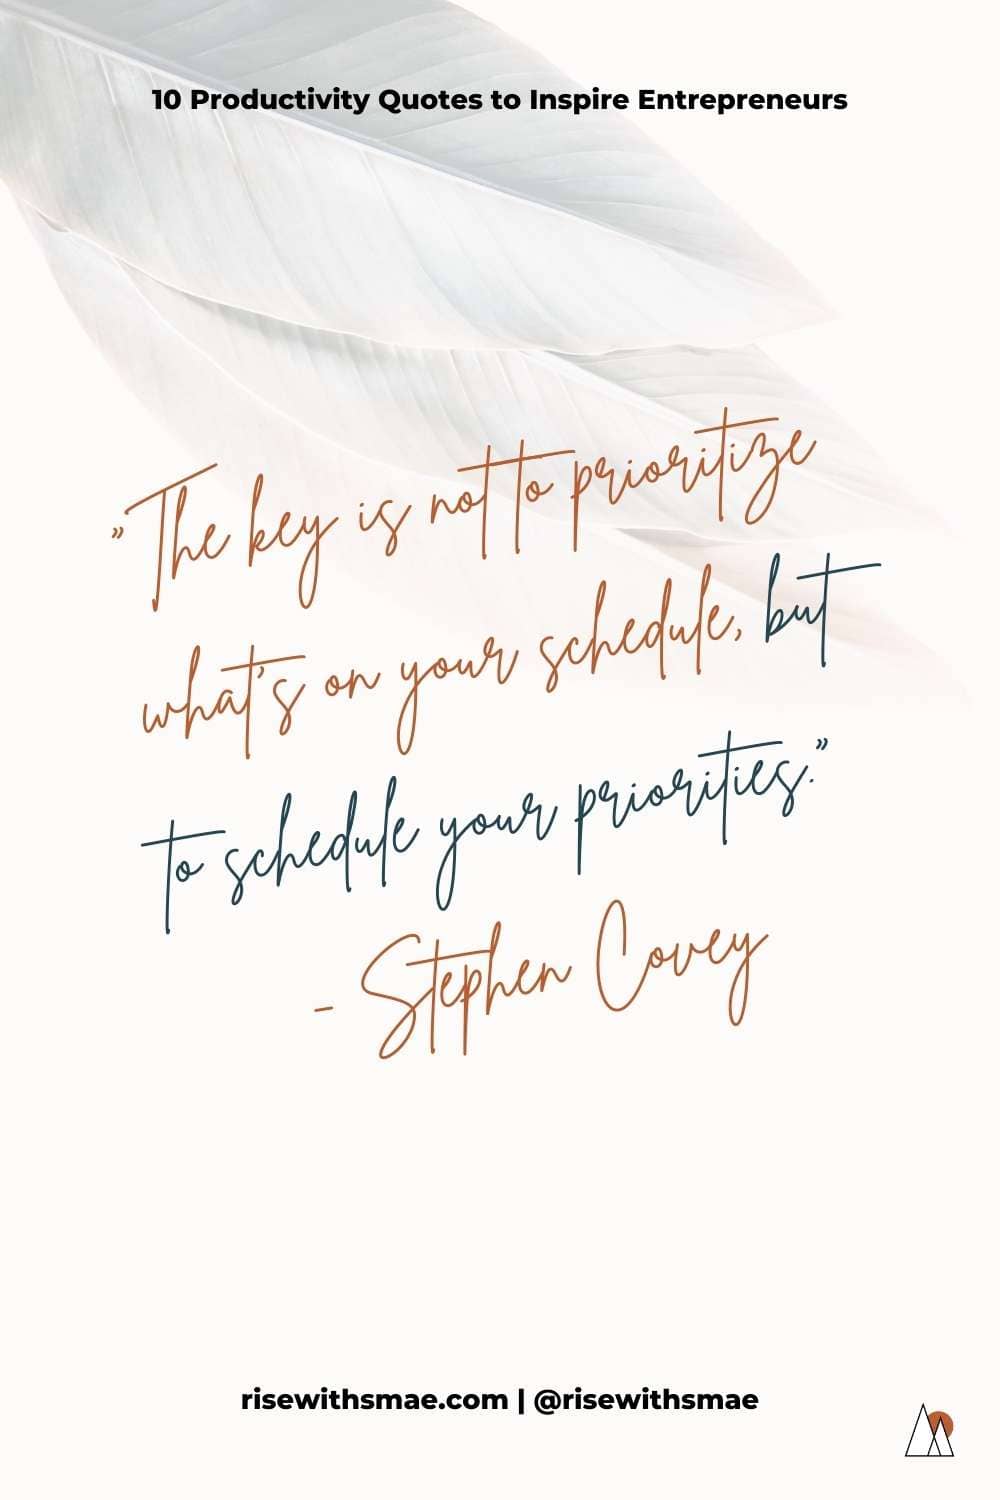 PRODUCTIVITY QUOTES FOR ENTREPRENEURS - Stephen Covey | Pin Image!